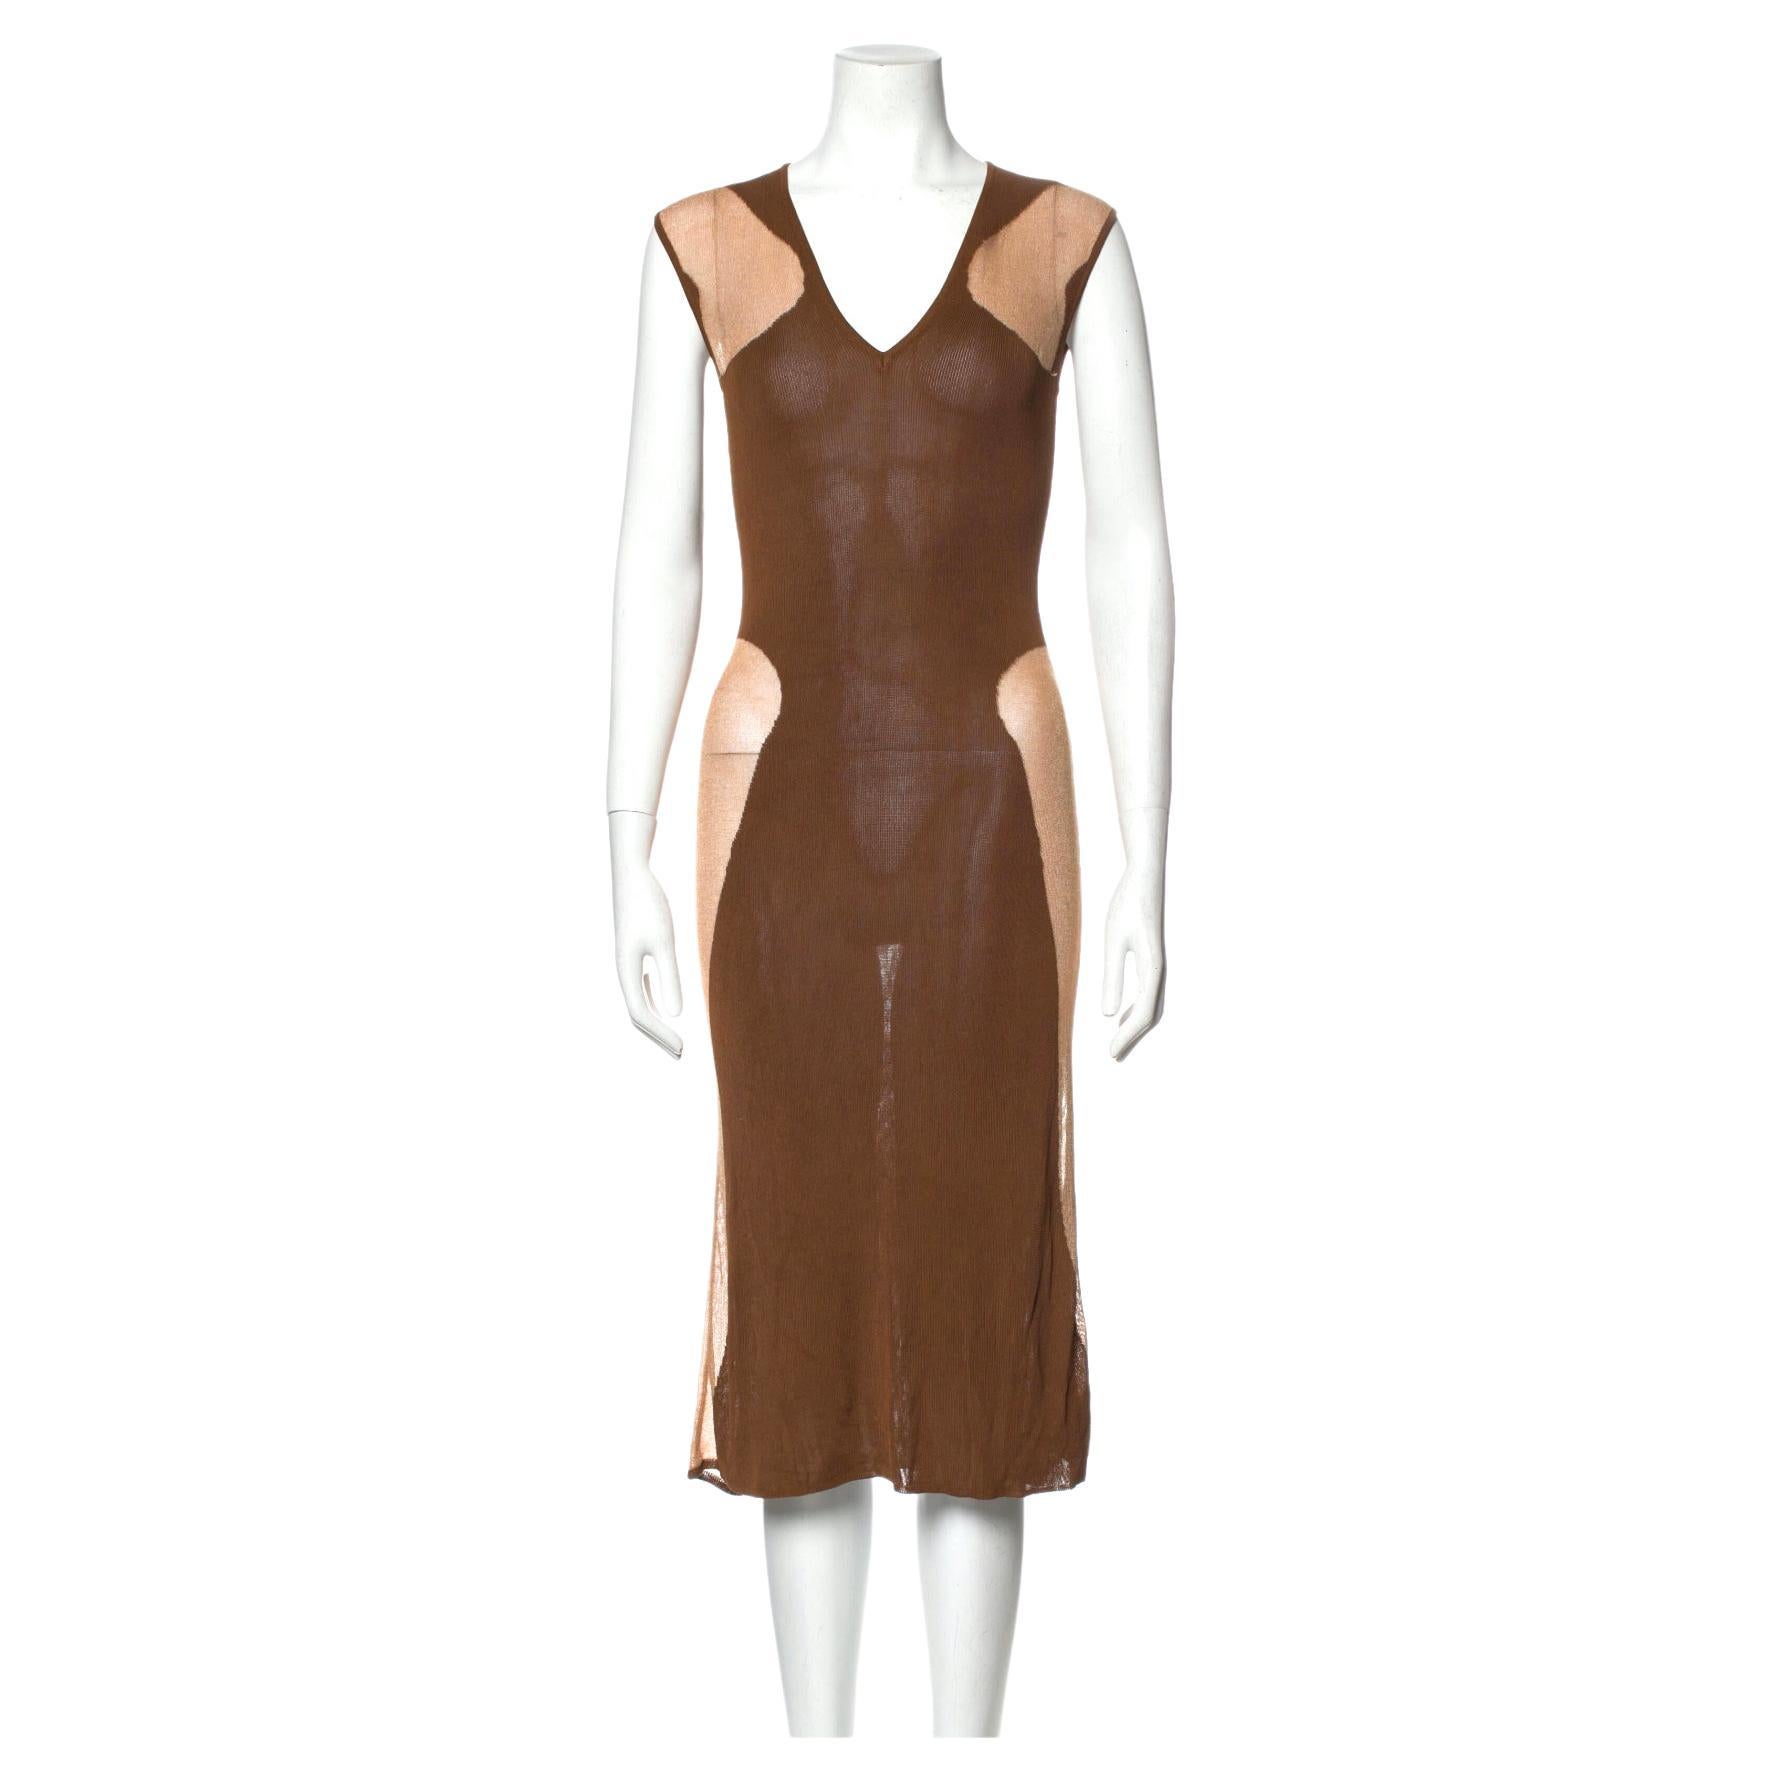 1990s Thierry Mugler Stretch Dress with Sheer panels
Condition: Excellent
Size M